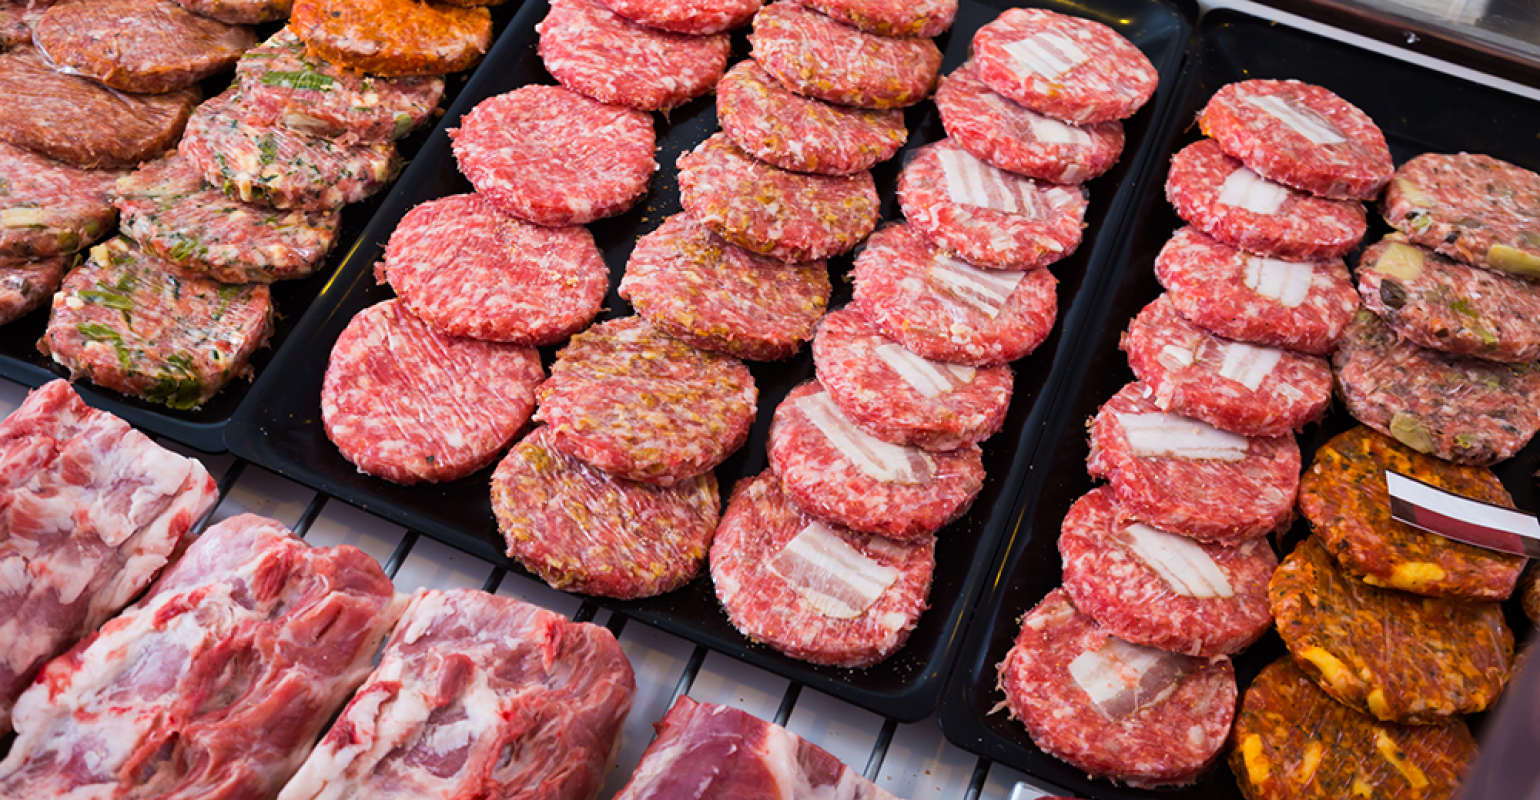 Adding value — and sales — to meat departments